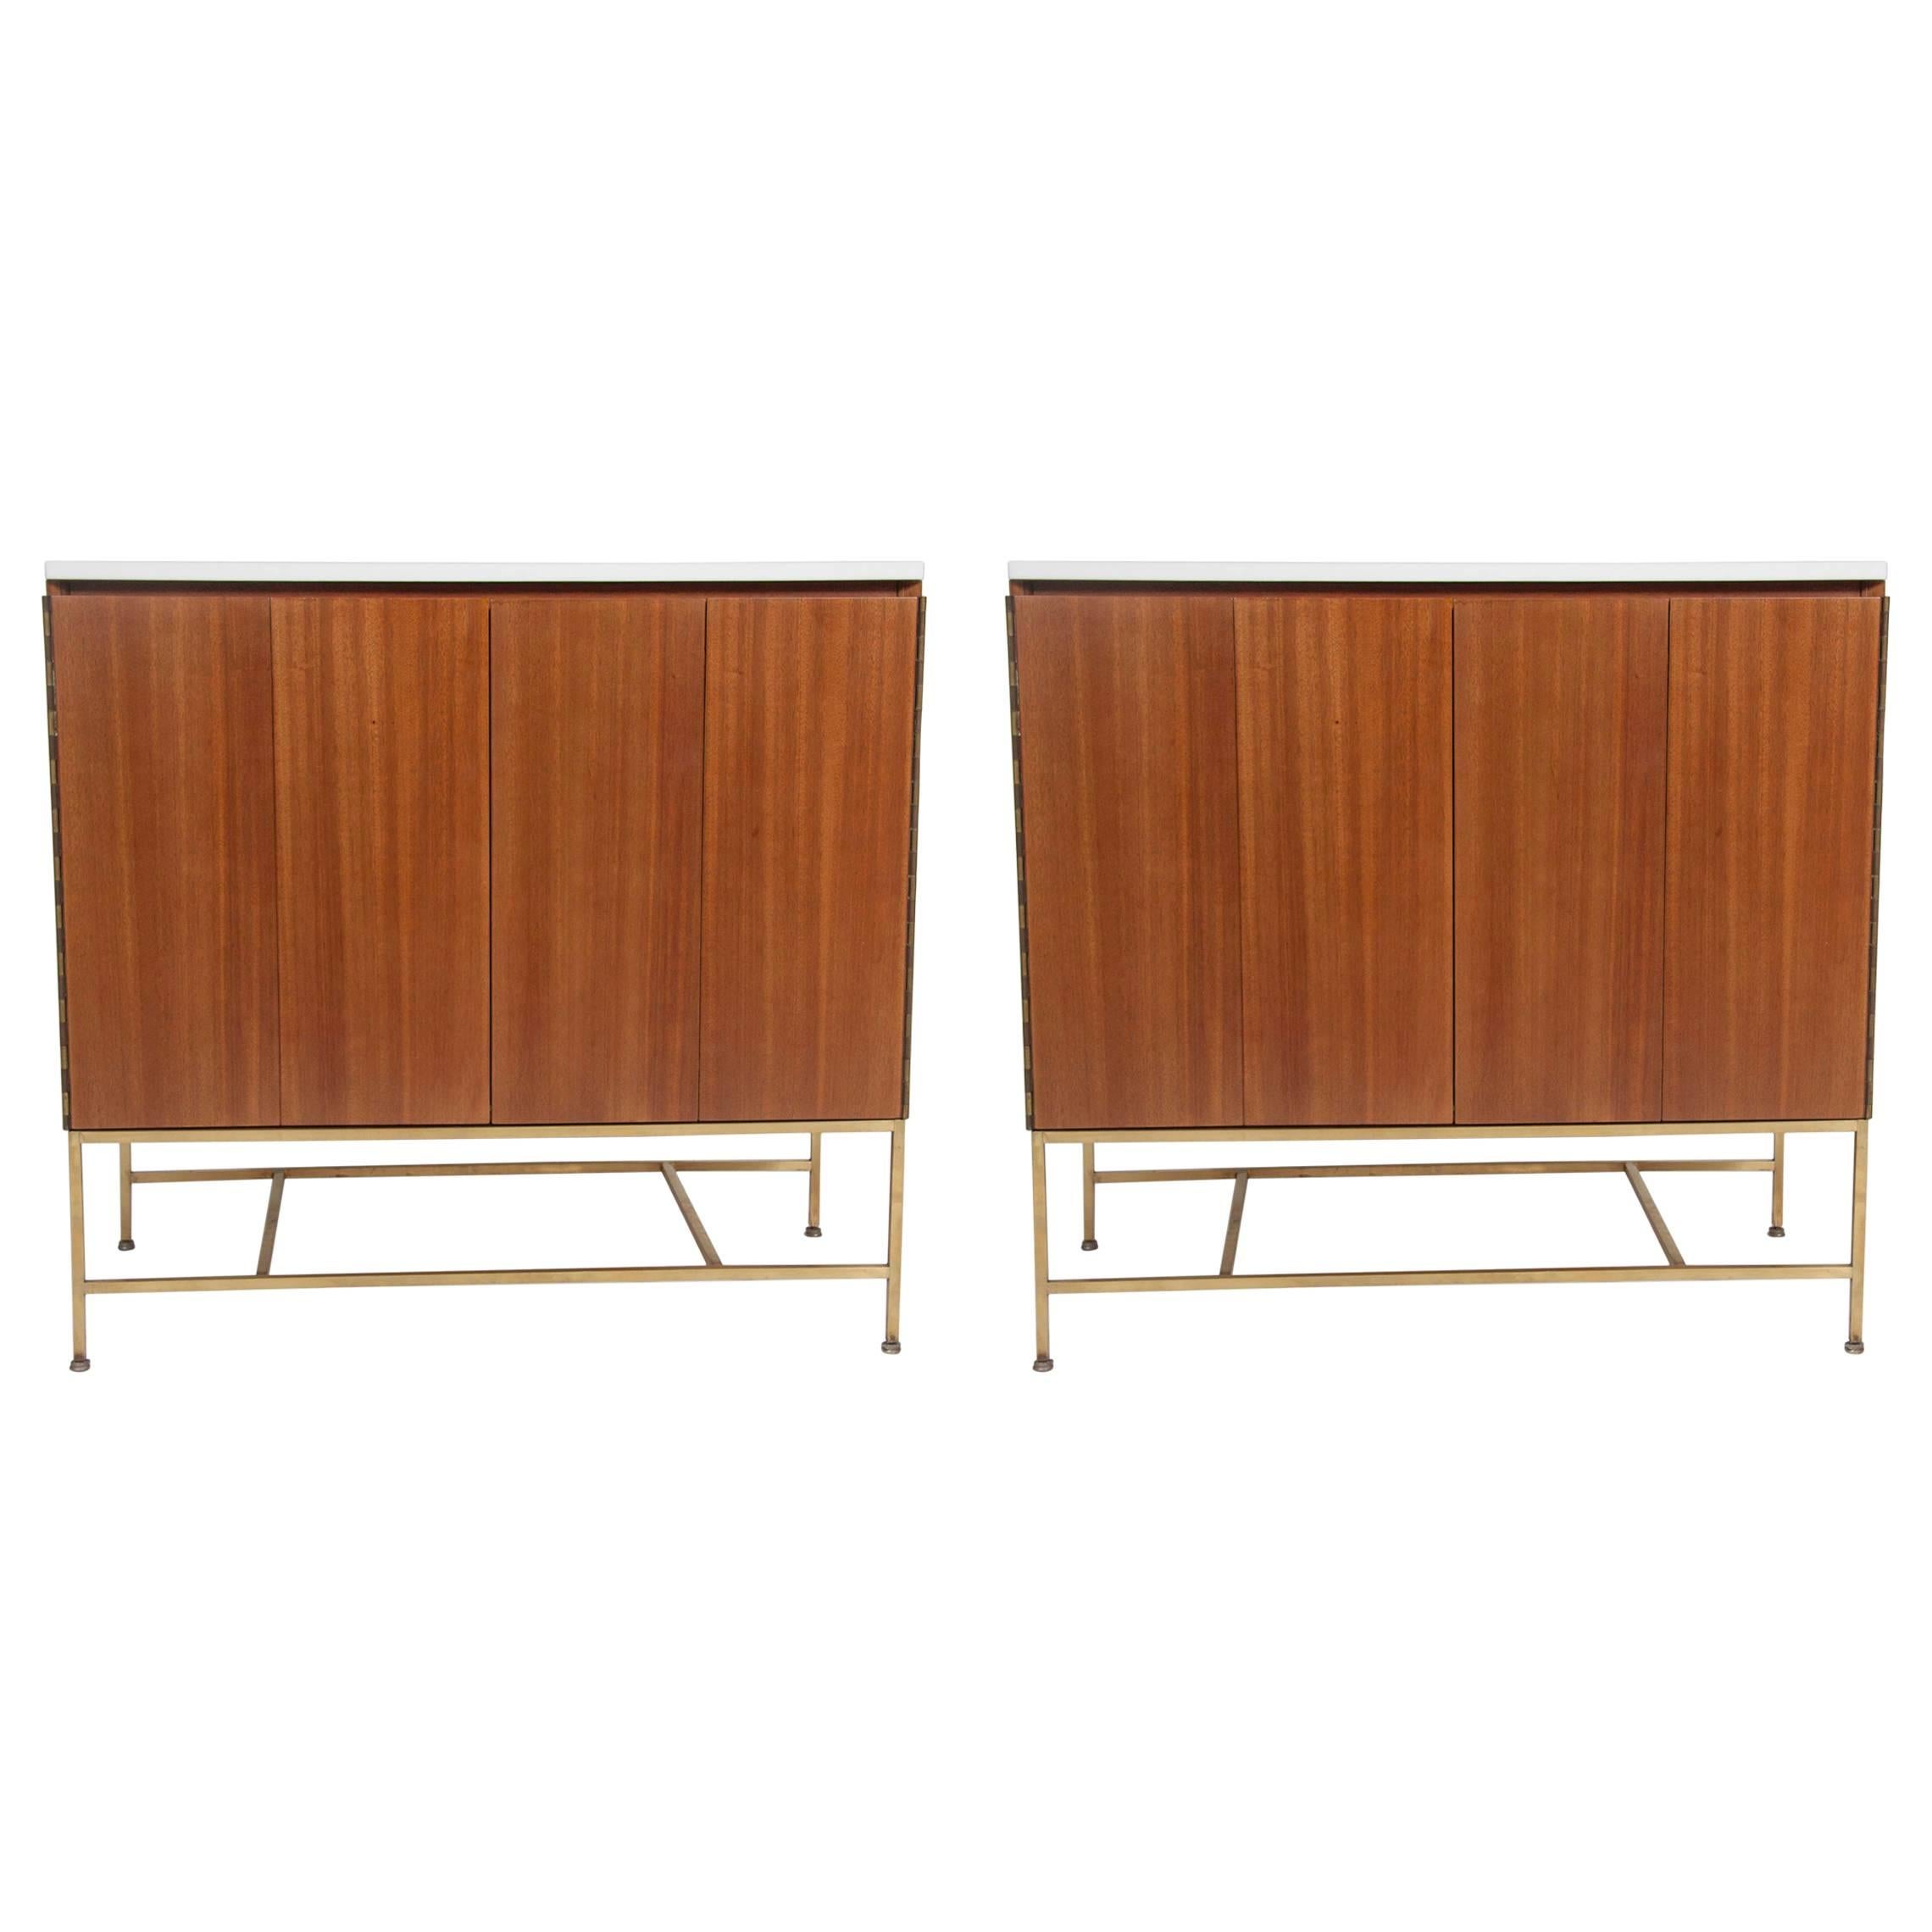 A pair of Paul McCobb bedside tables with period Vitrolite white glass tops made by Calvin.   The cases have two bi-fold doors each and a single drawer over one shelve.   Both cabinets are raised on brass armatures.  